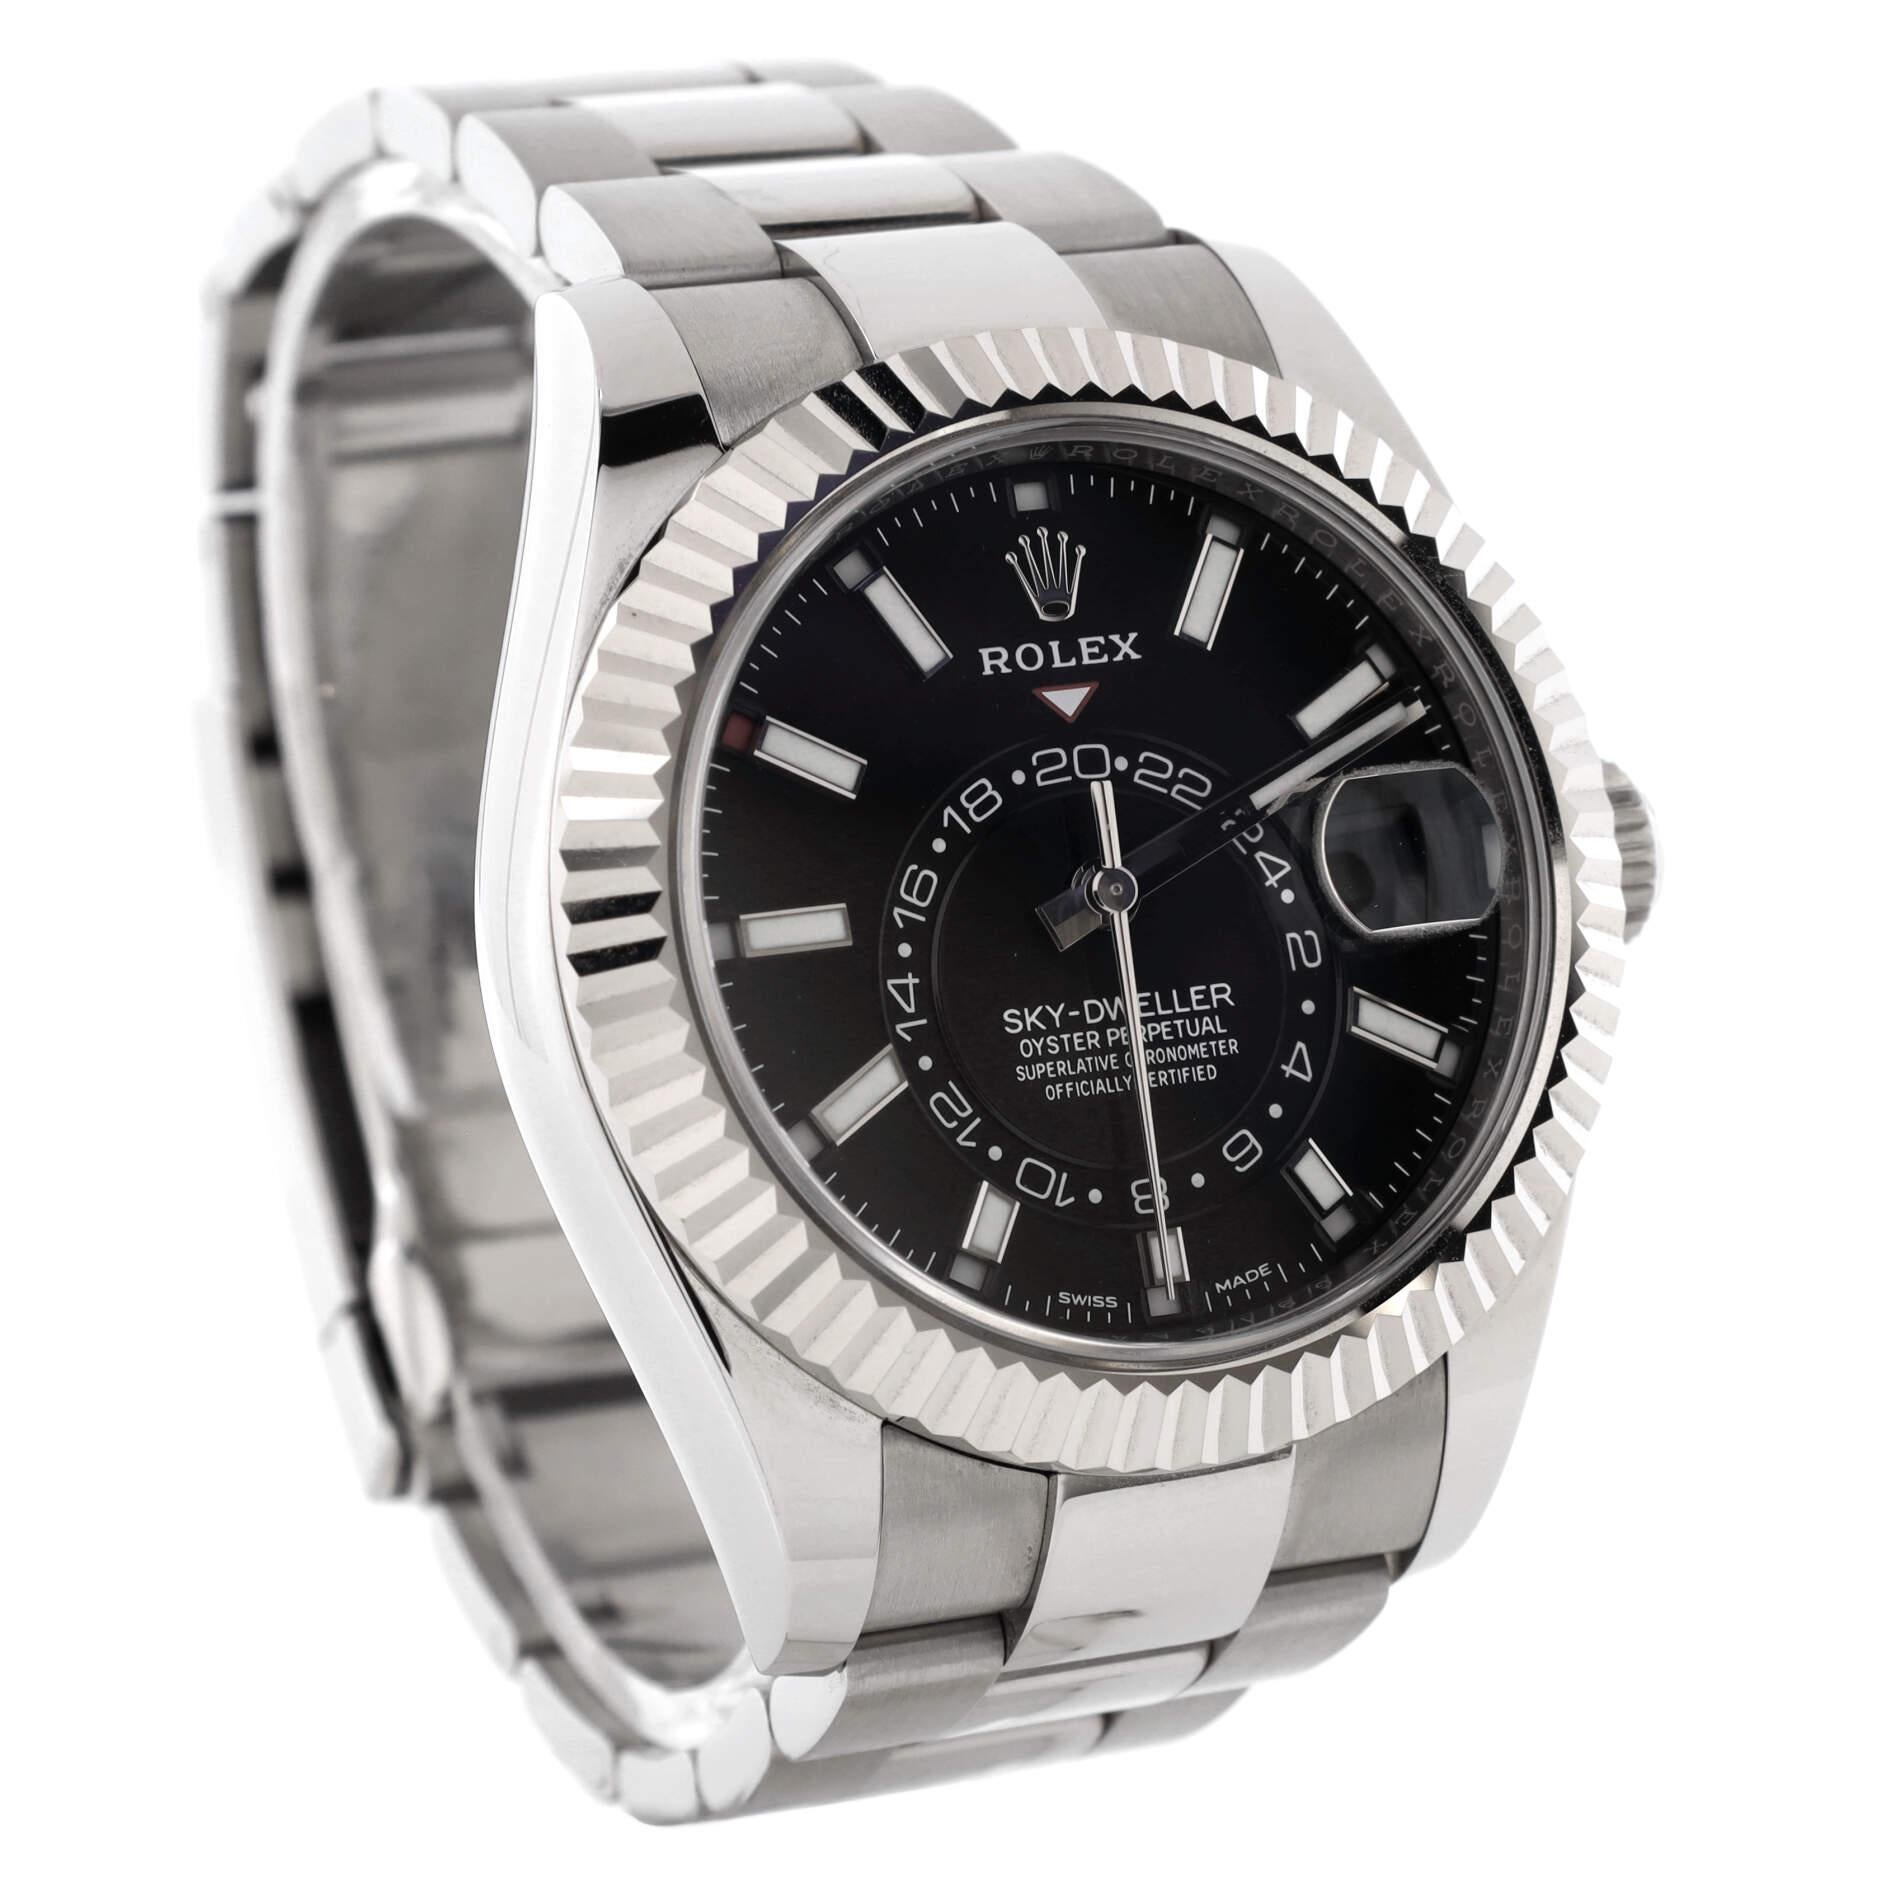 Rolex Sky-Dweller Oyster Perpetual Chronometer Black Automatic Watch Stai In Good Condition For Sale In New York, NY